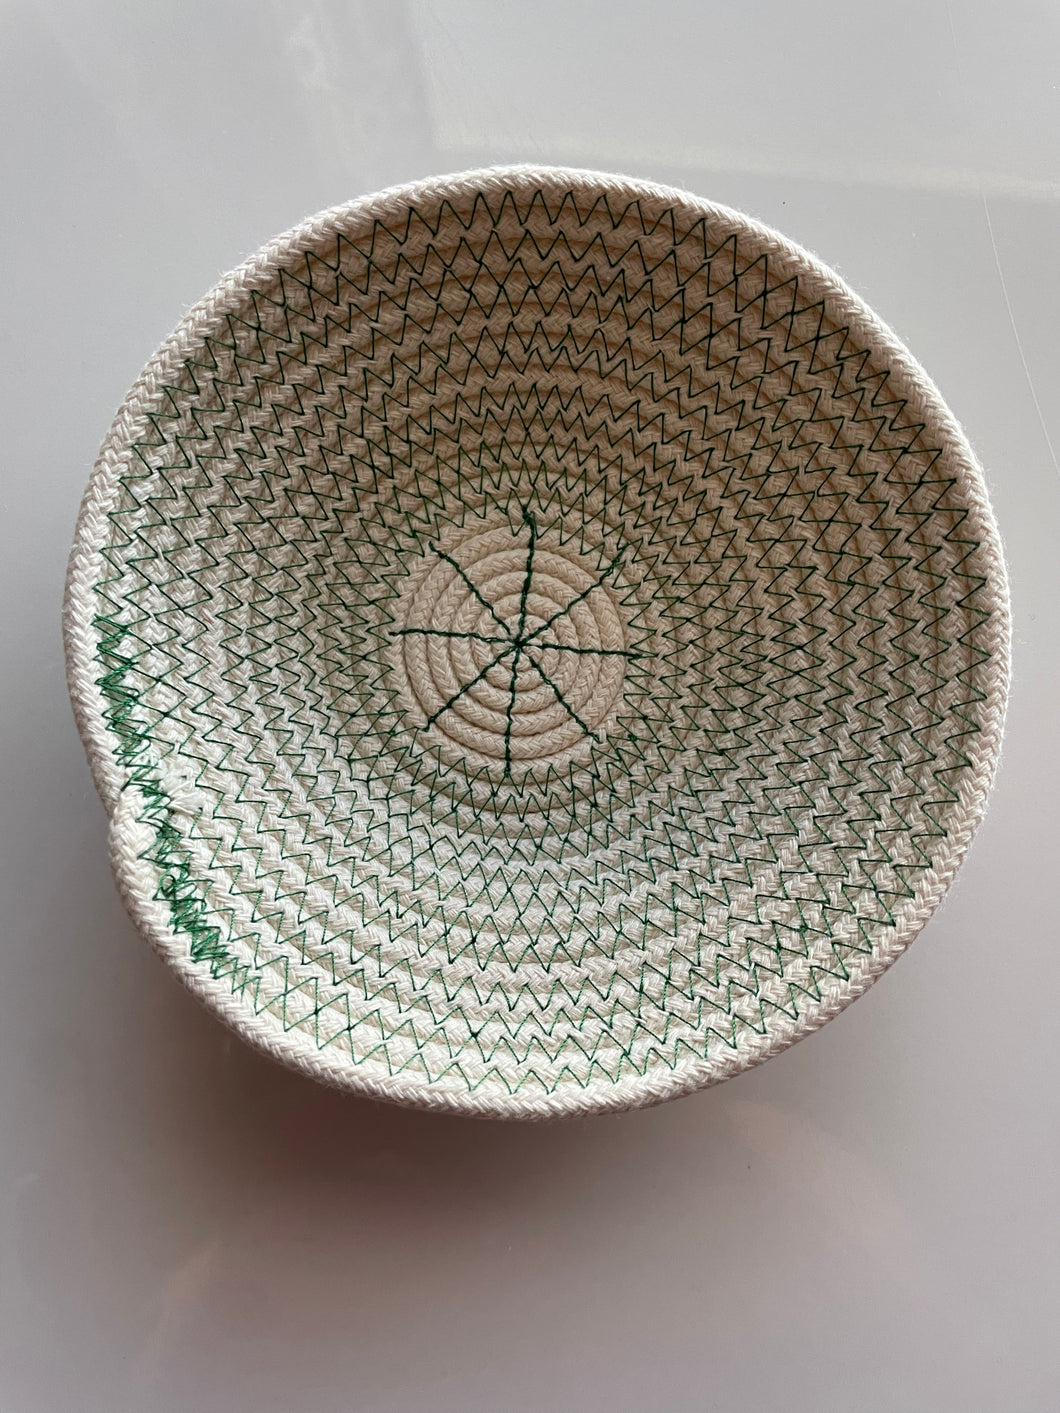 Notions Bowl